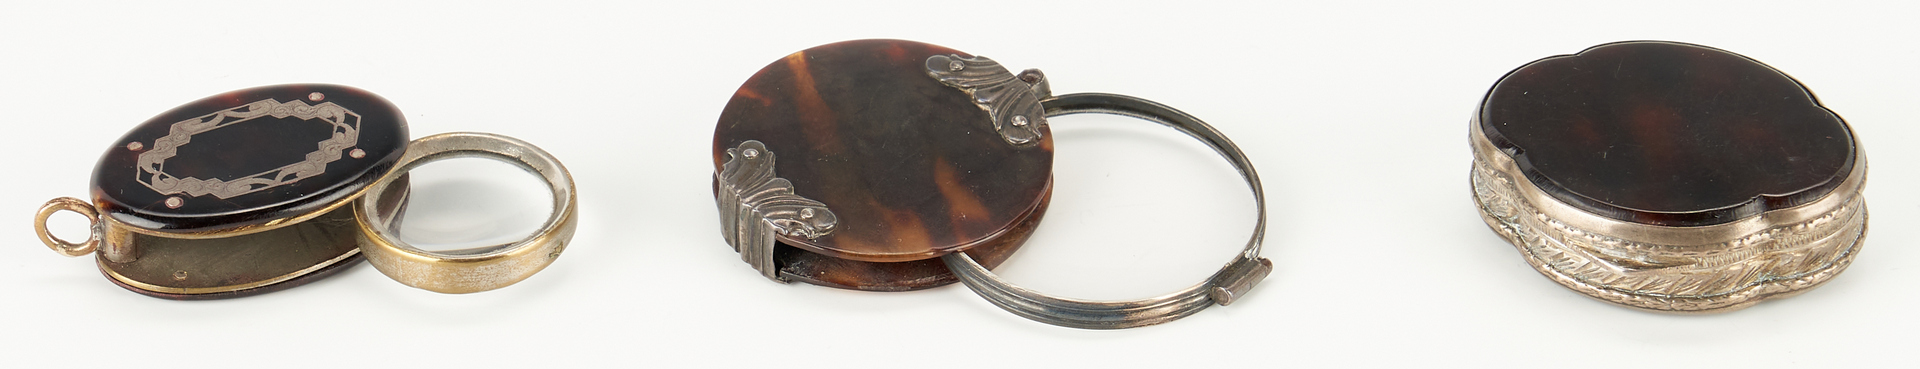 Lot 79: 4 Tortoiseshell Boxes and 2 Magnifiers, 6 items